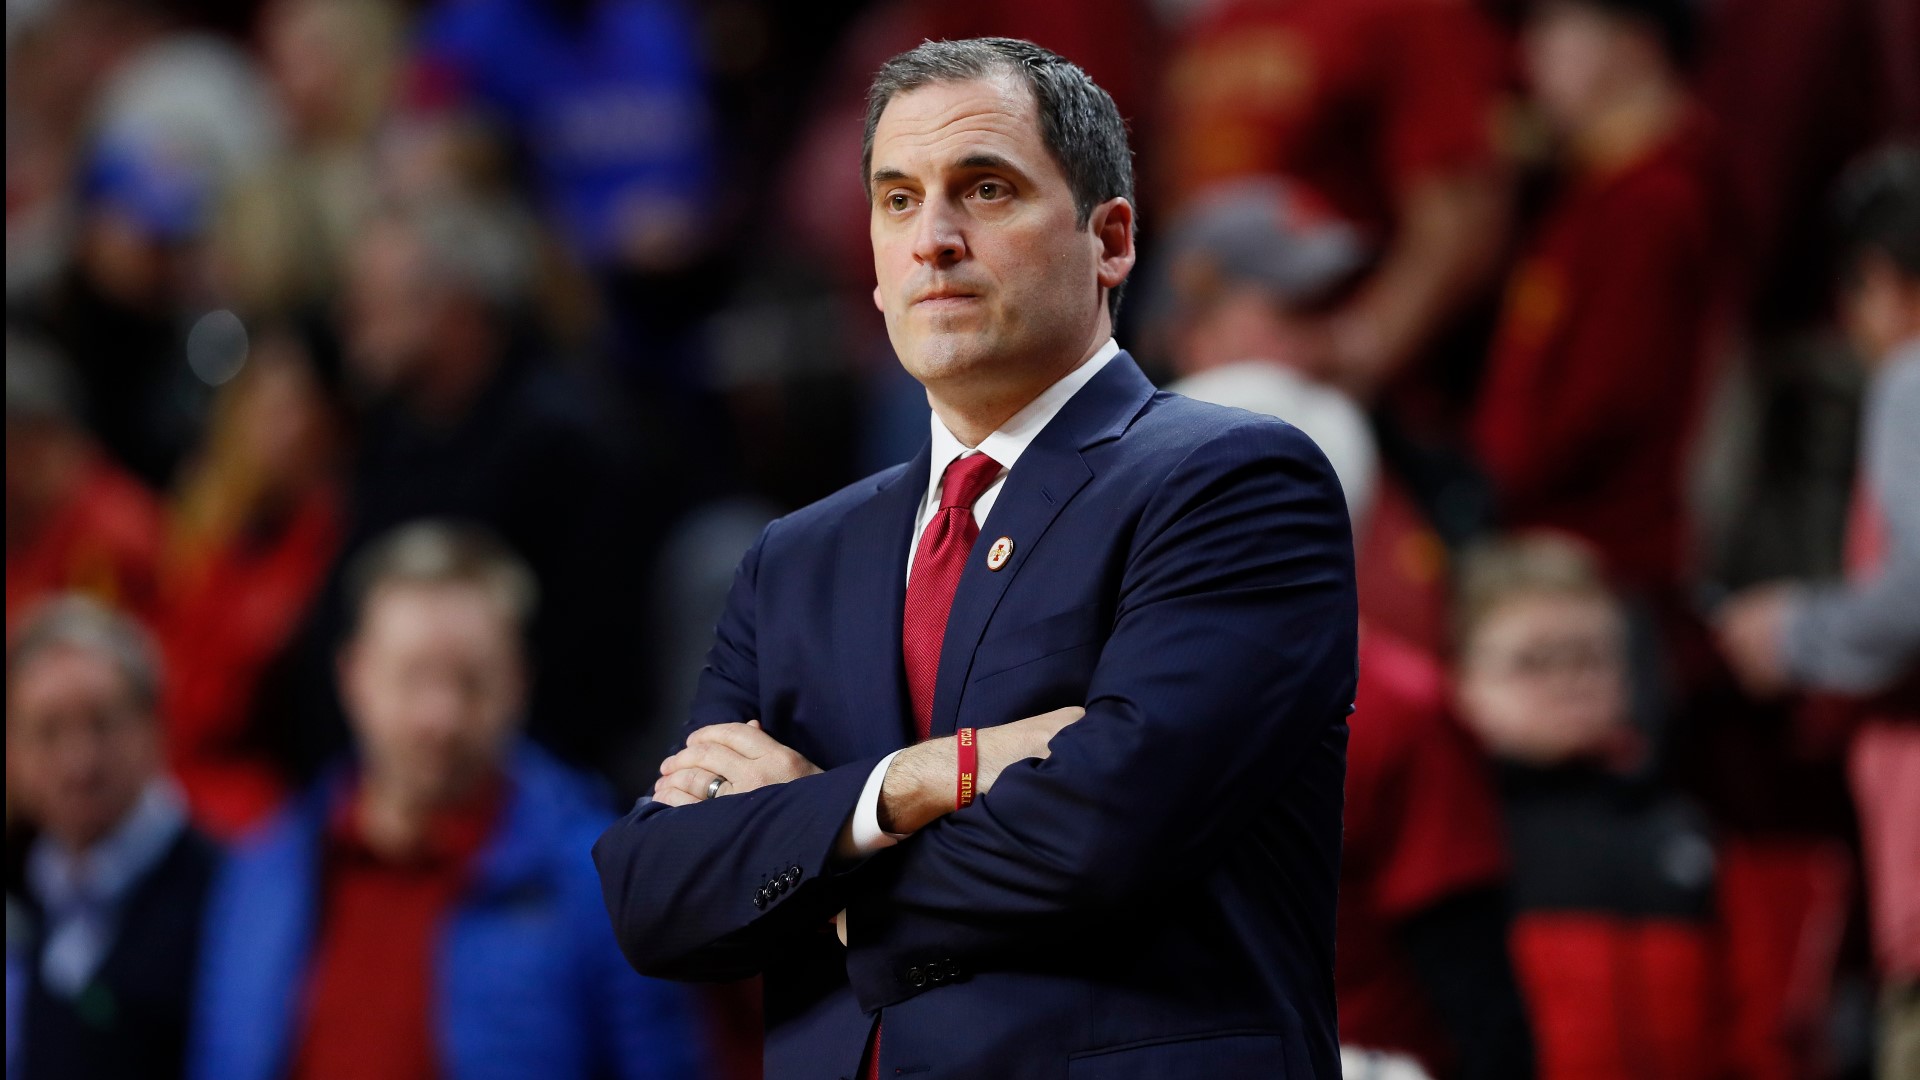 Iowa State and Men's Basketball Coach, Steve Prohm, have agreed to part ways after 2-22 season.